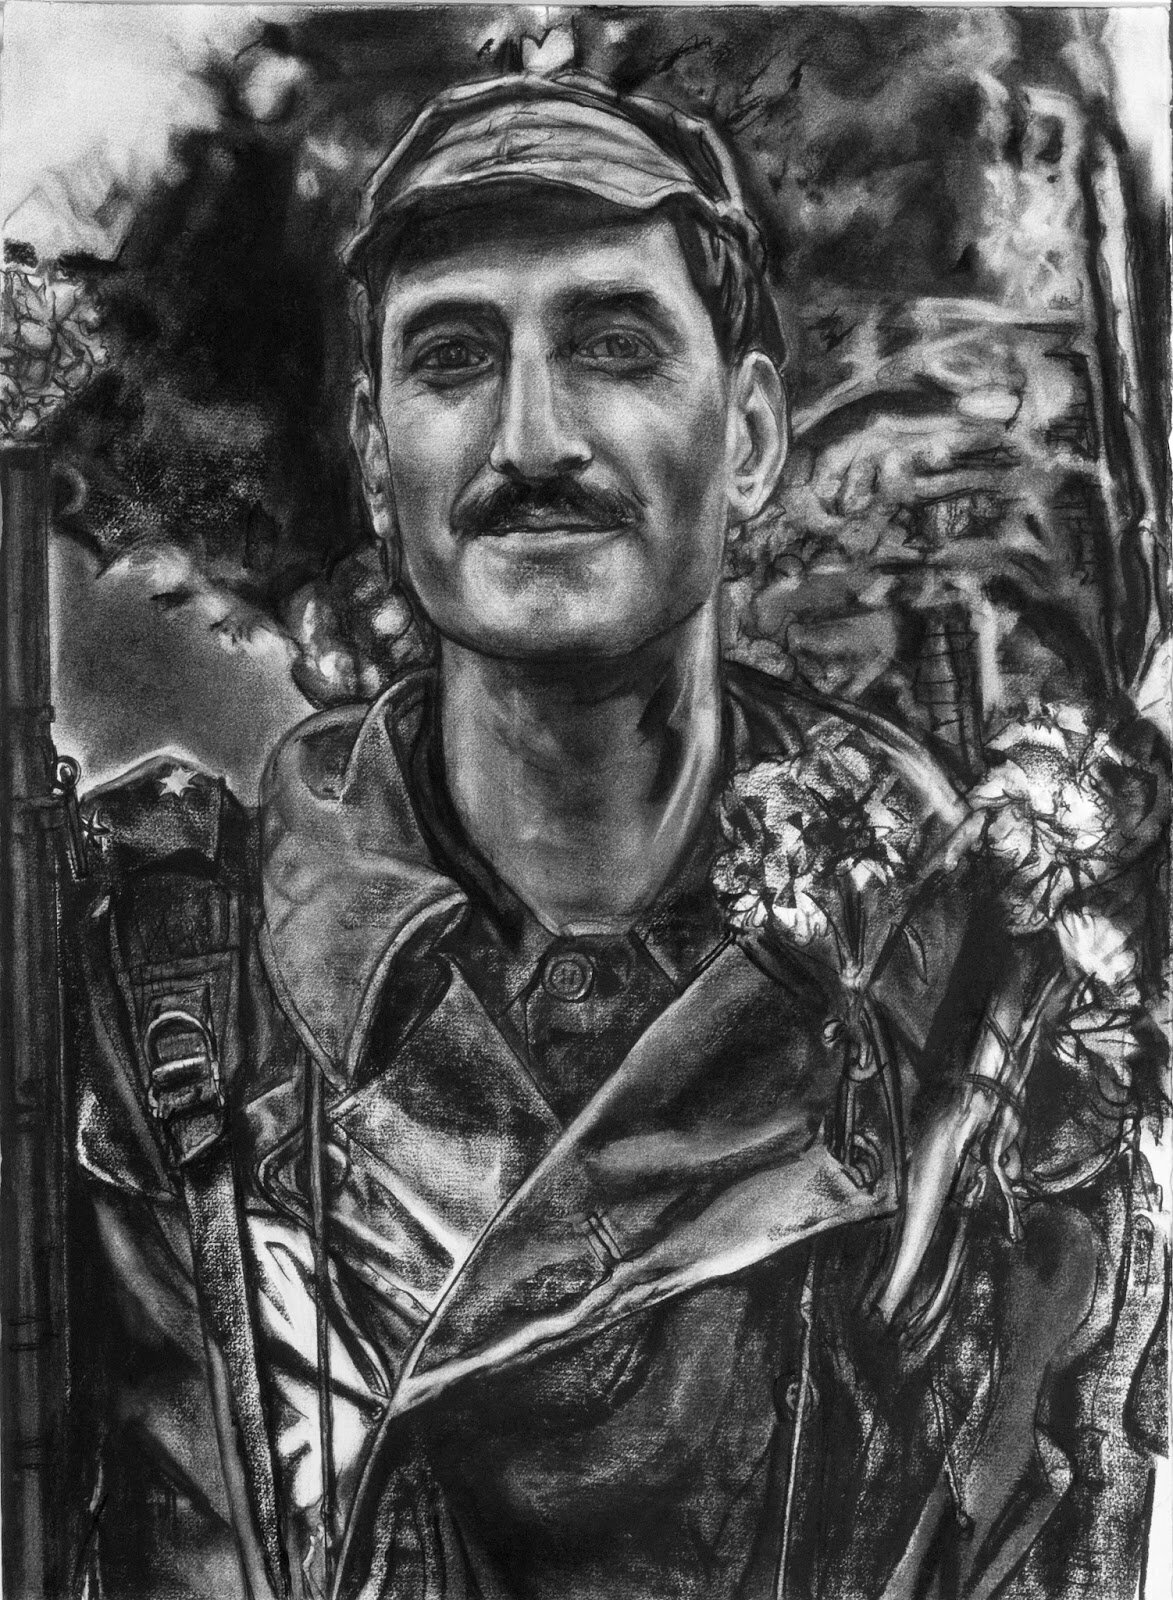  Mary Spencer,  Guns and Carnations,  Charcoal on Rag Paper, 30”x 22” 